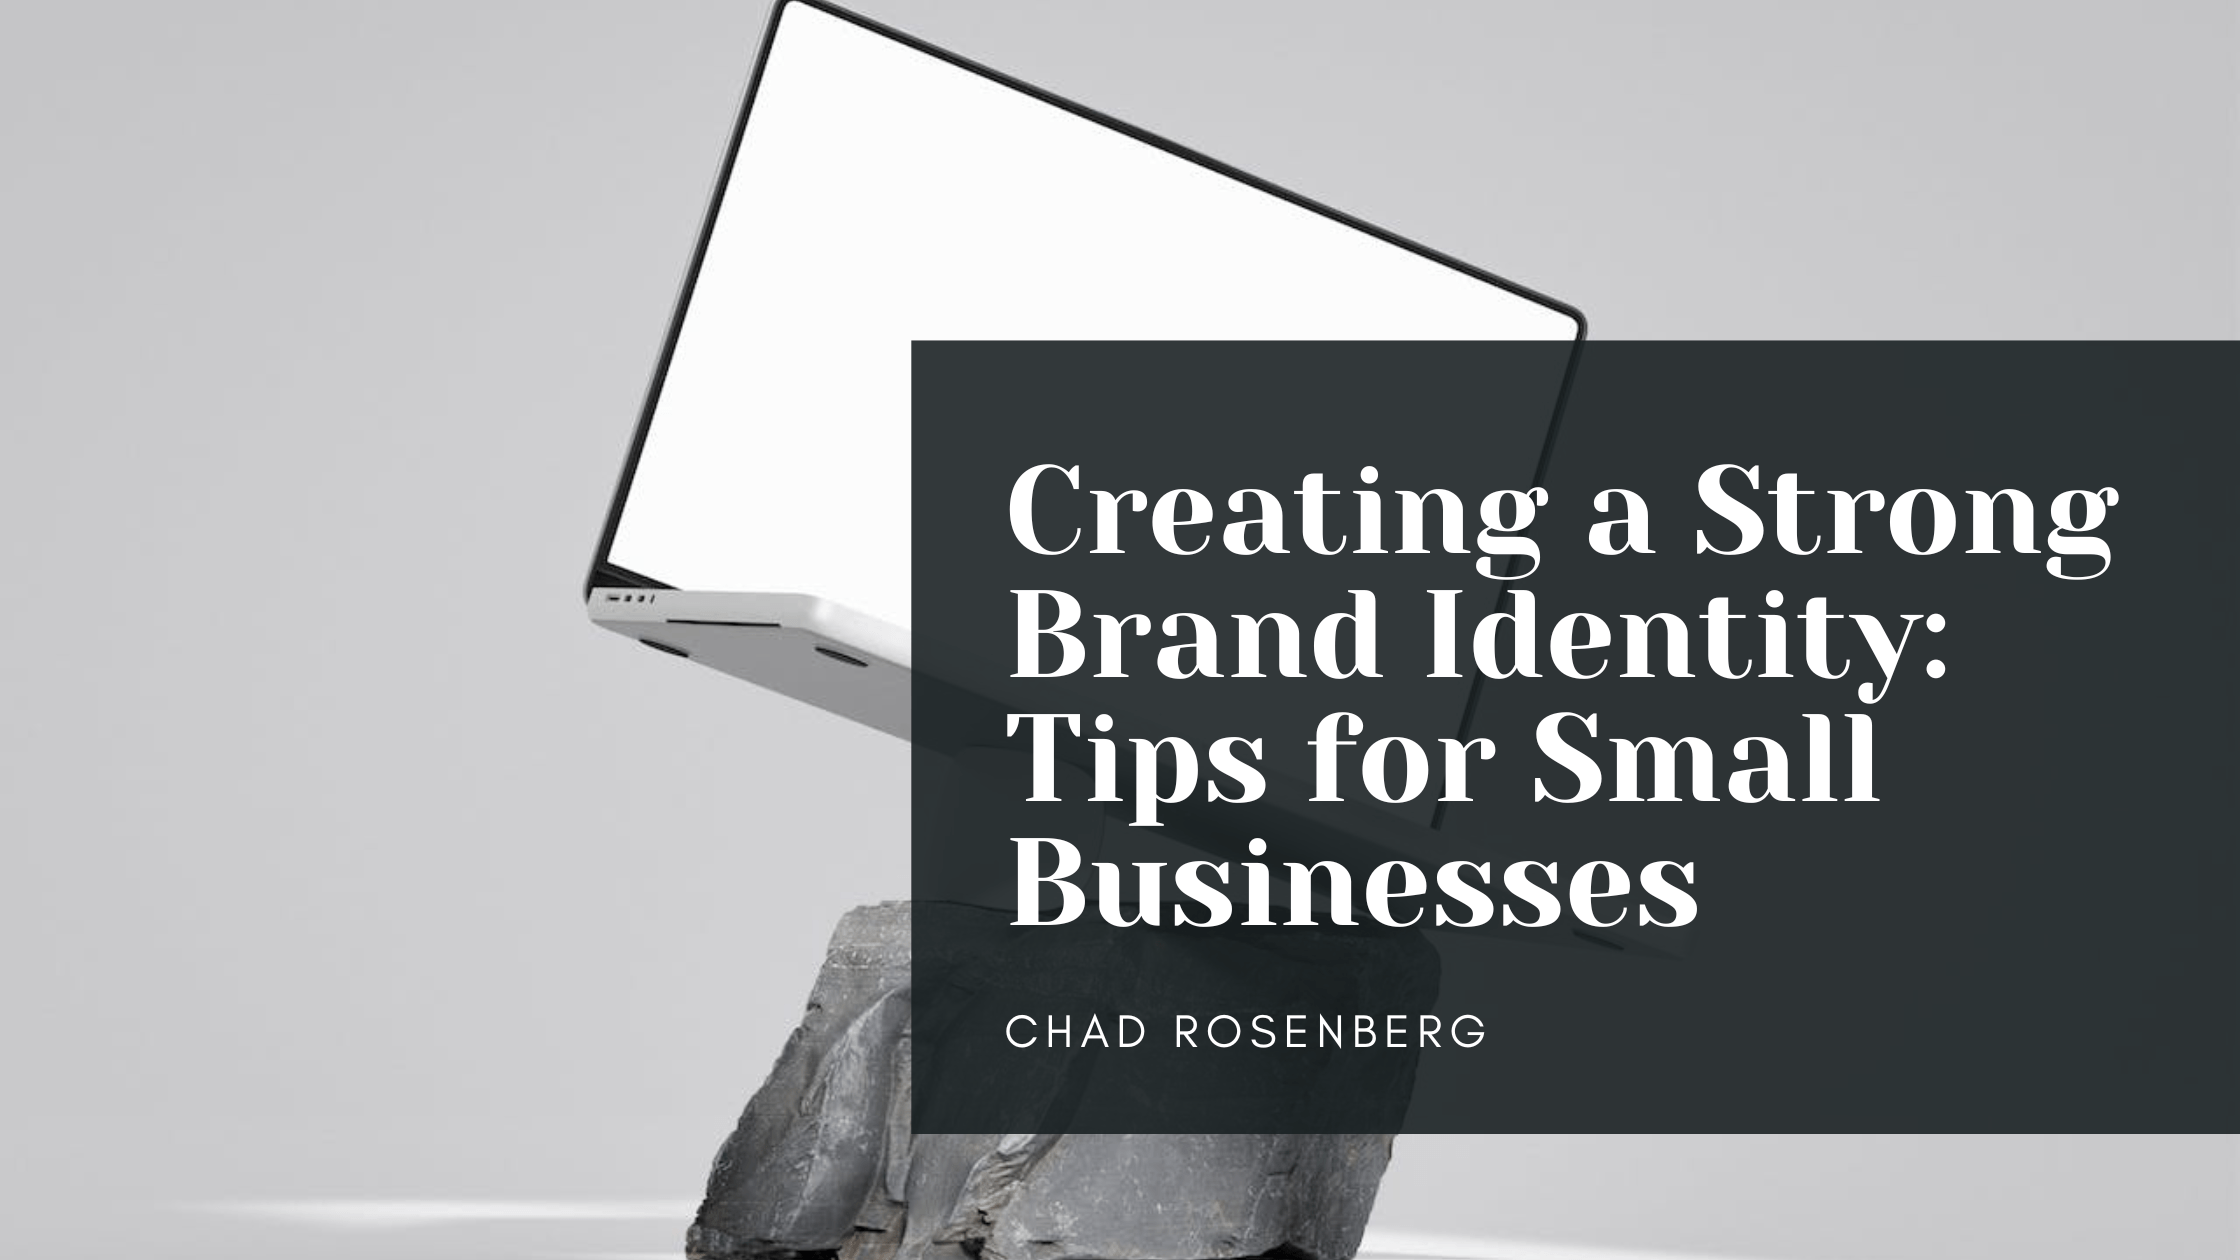 Creating a Strong Brand Identity: Tips for Small Businesses